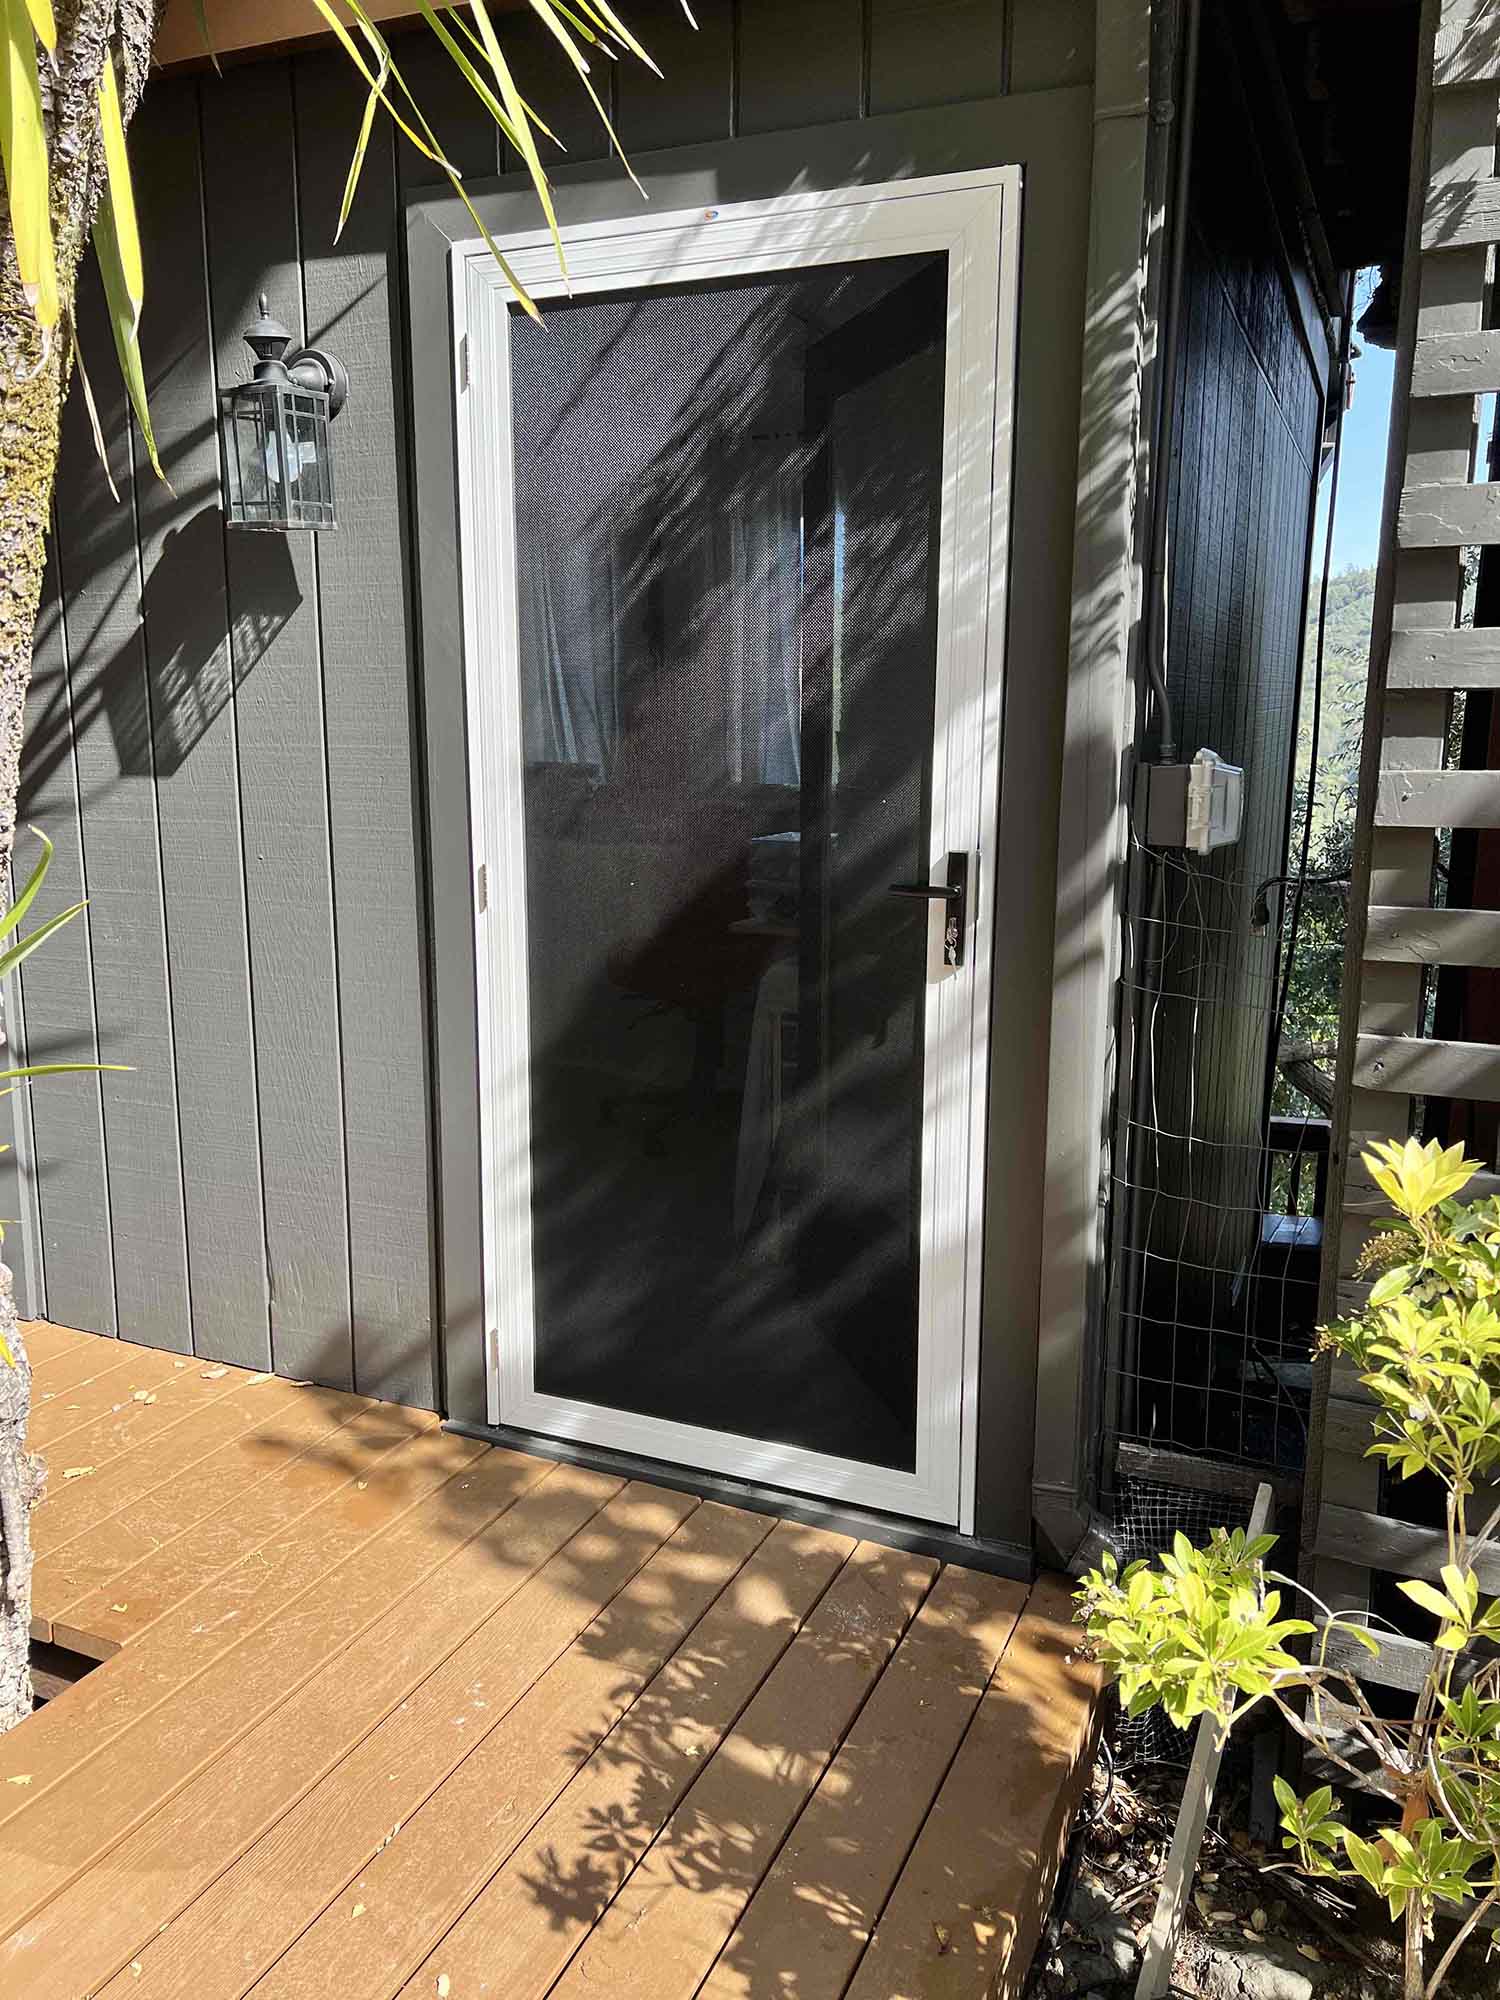 ClimatePro Installs the Best Security Screens for Homes in Fairfax, CA